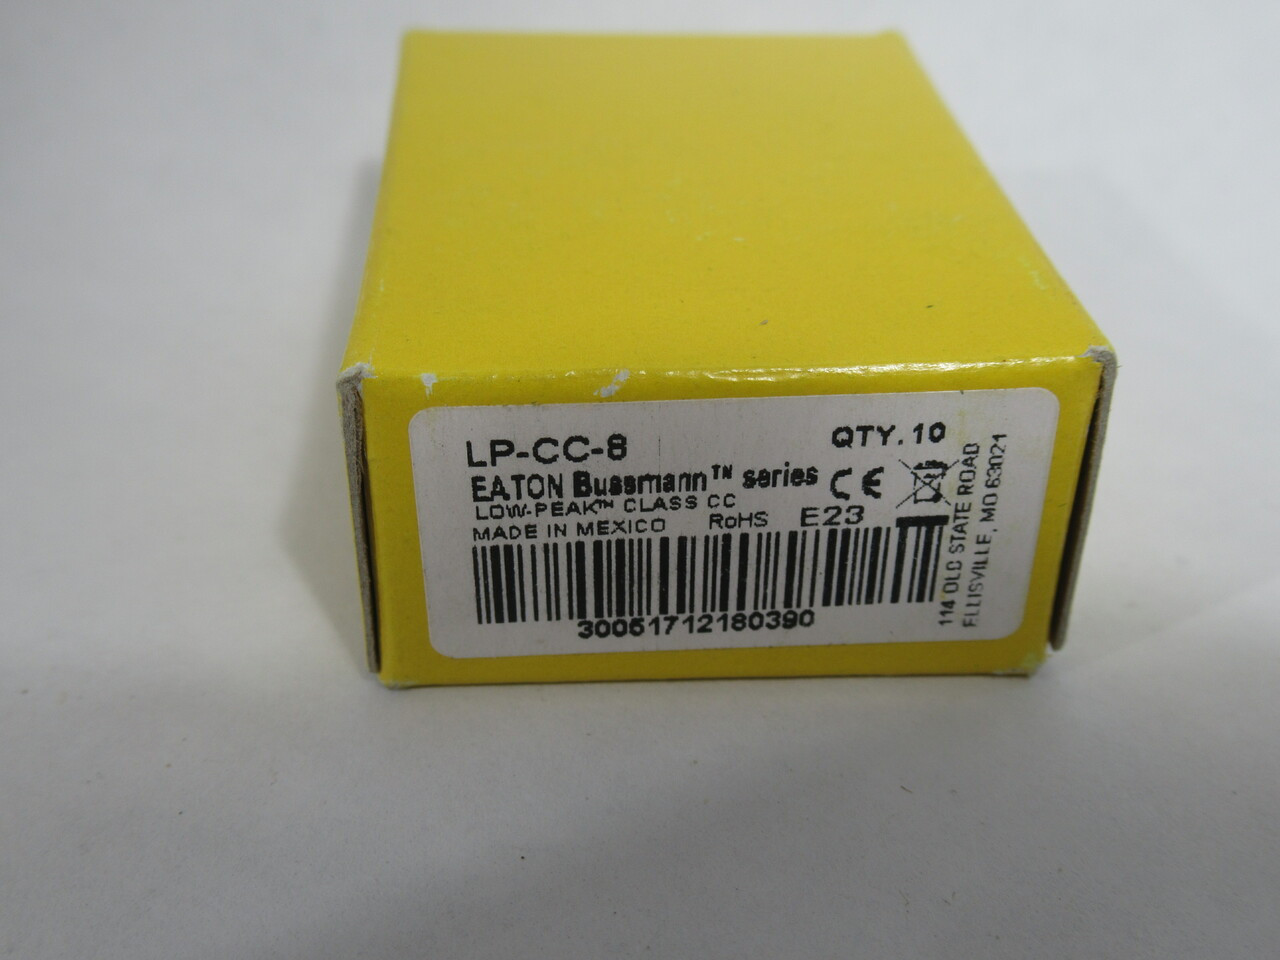 Low-Peak LP-CC-8 Current Limiting Time Delay Fuse 8A 600VAC 10-Pack NEW